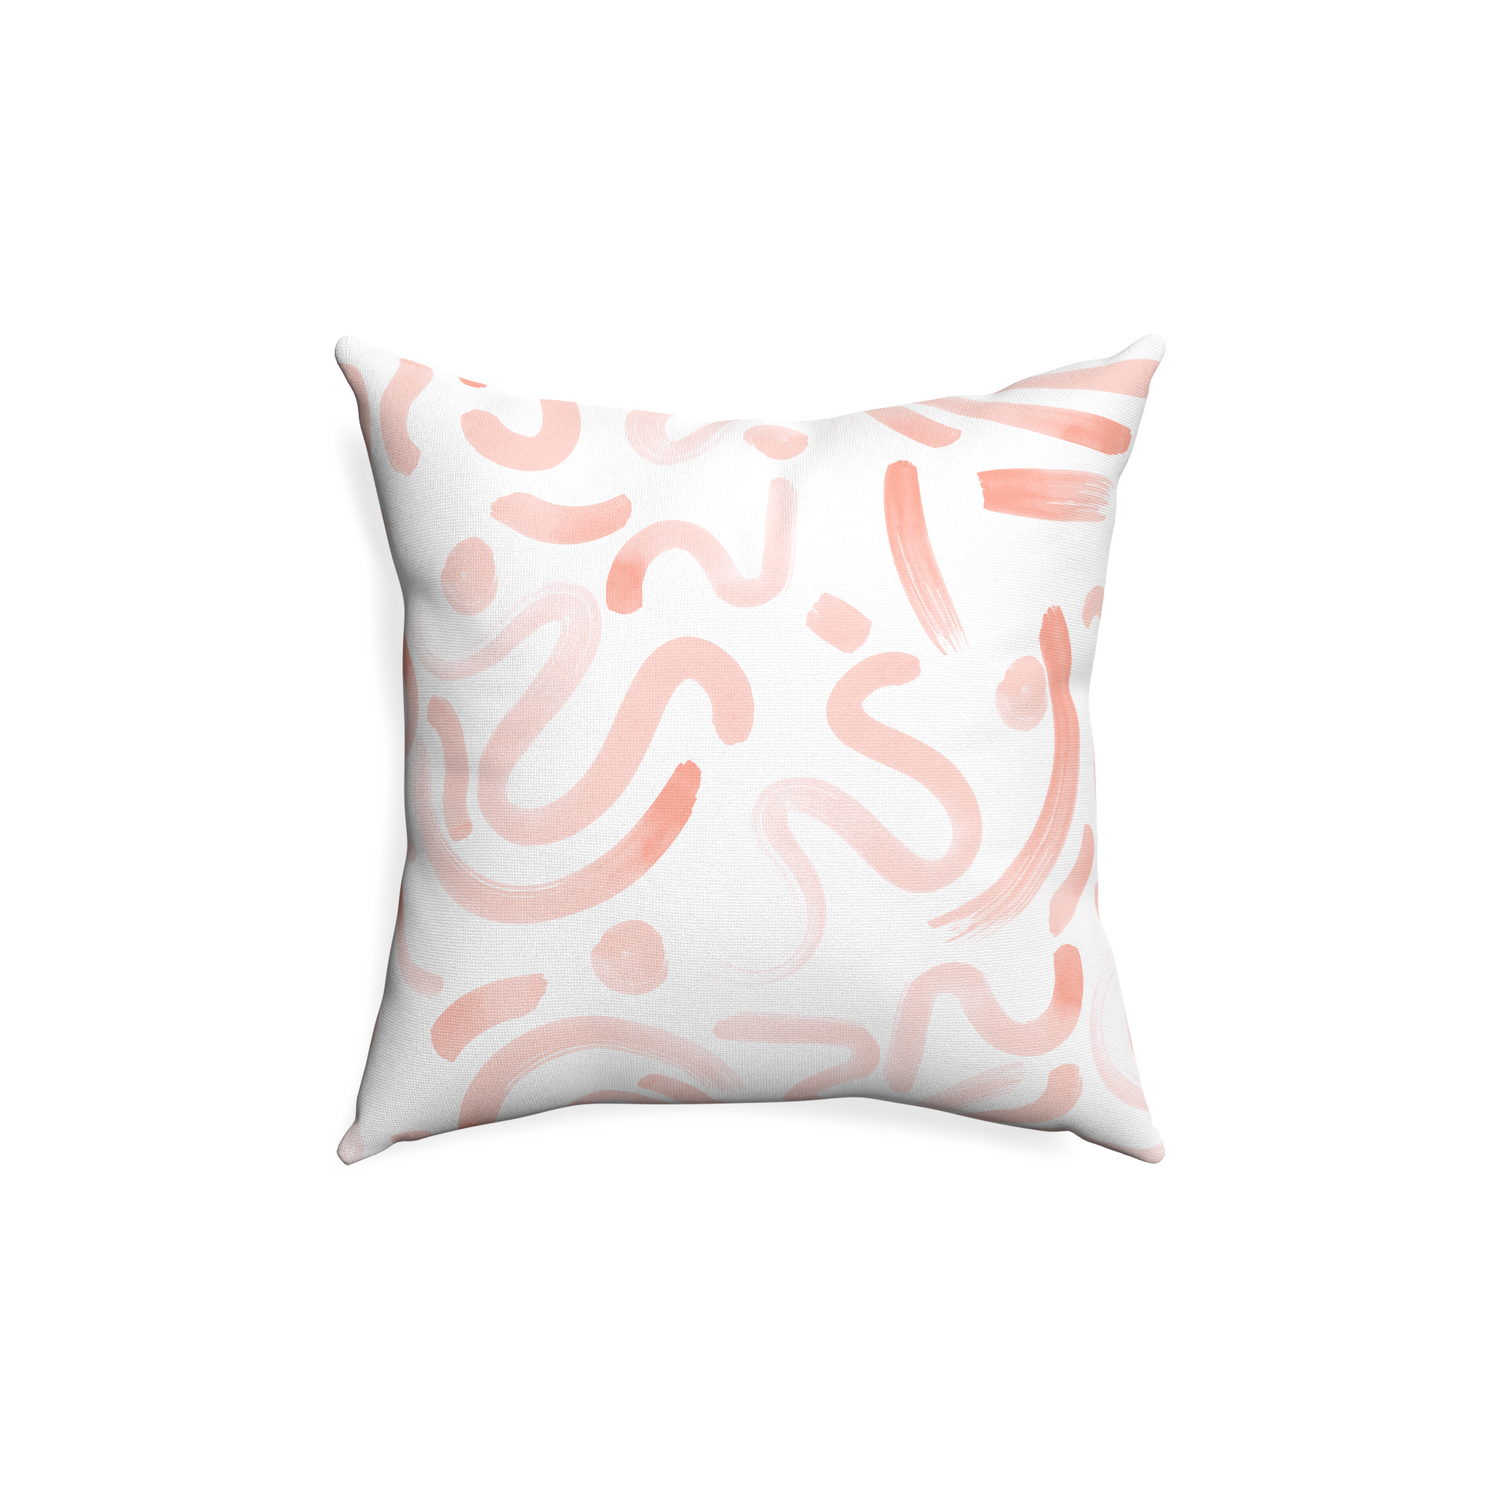 18-square hockney pink custom pink graphicpillow with none on white background